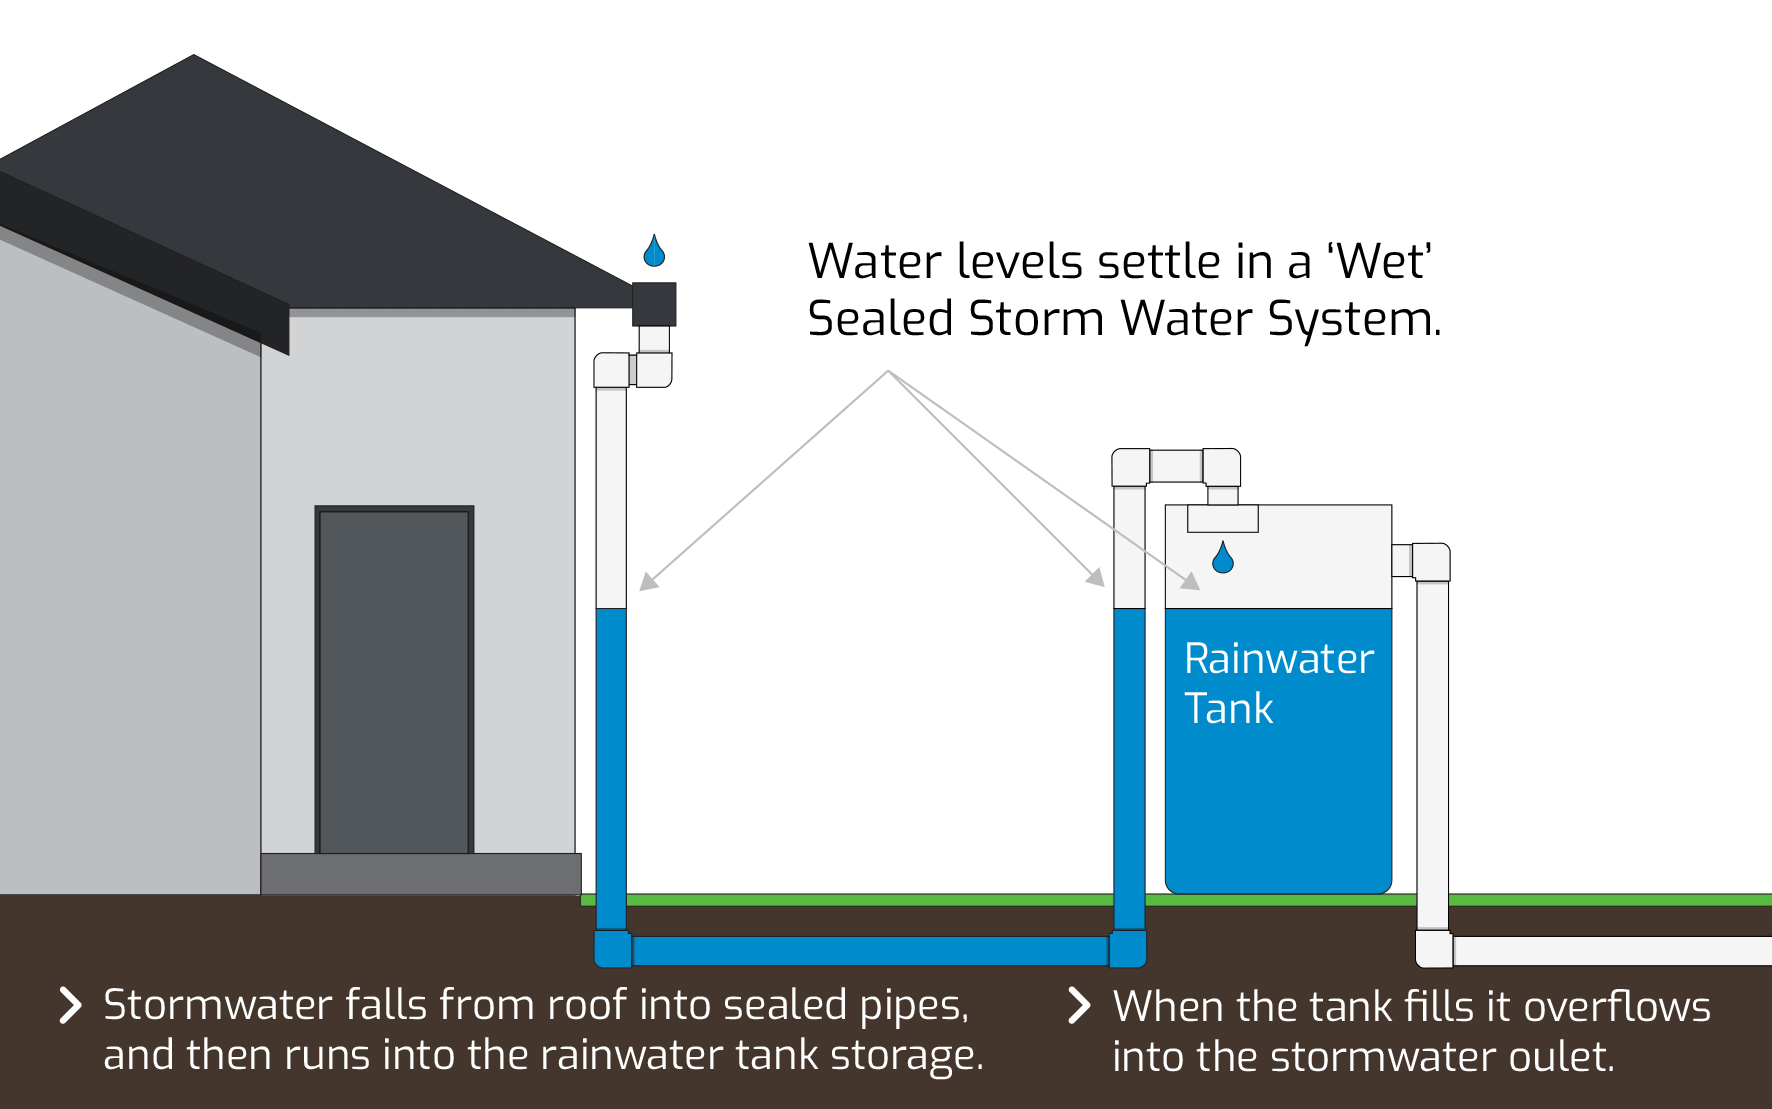 'Wet' or 'Sealed' Stormwater System